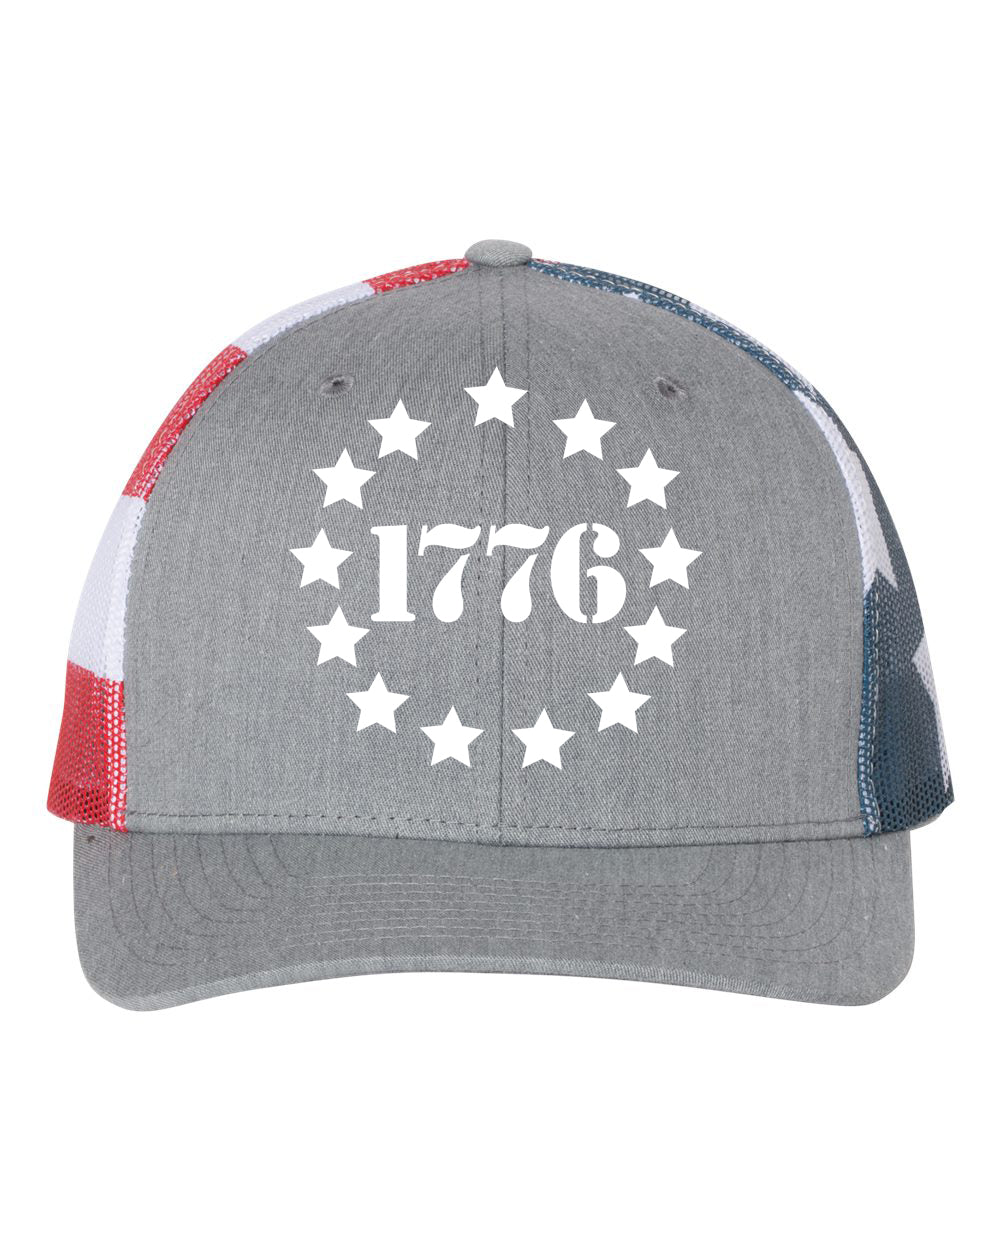 1776 Embroidered Stars and Stripes Mesh Trucker Snapback Cap